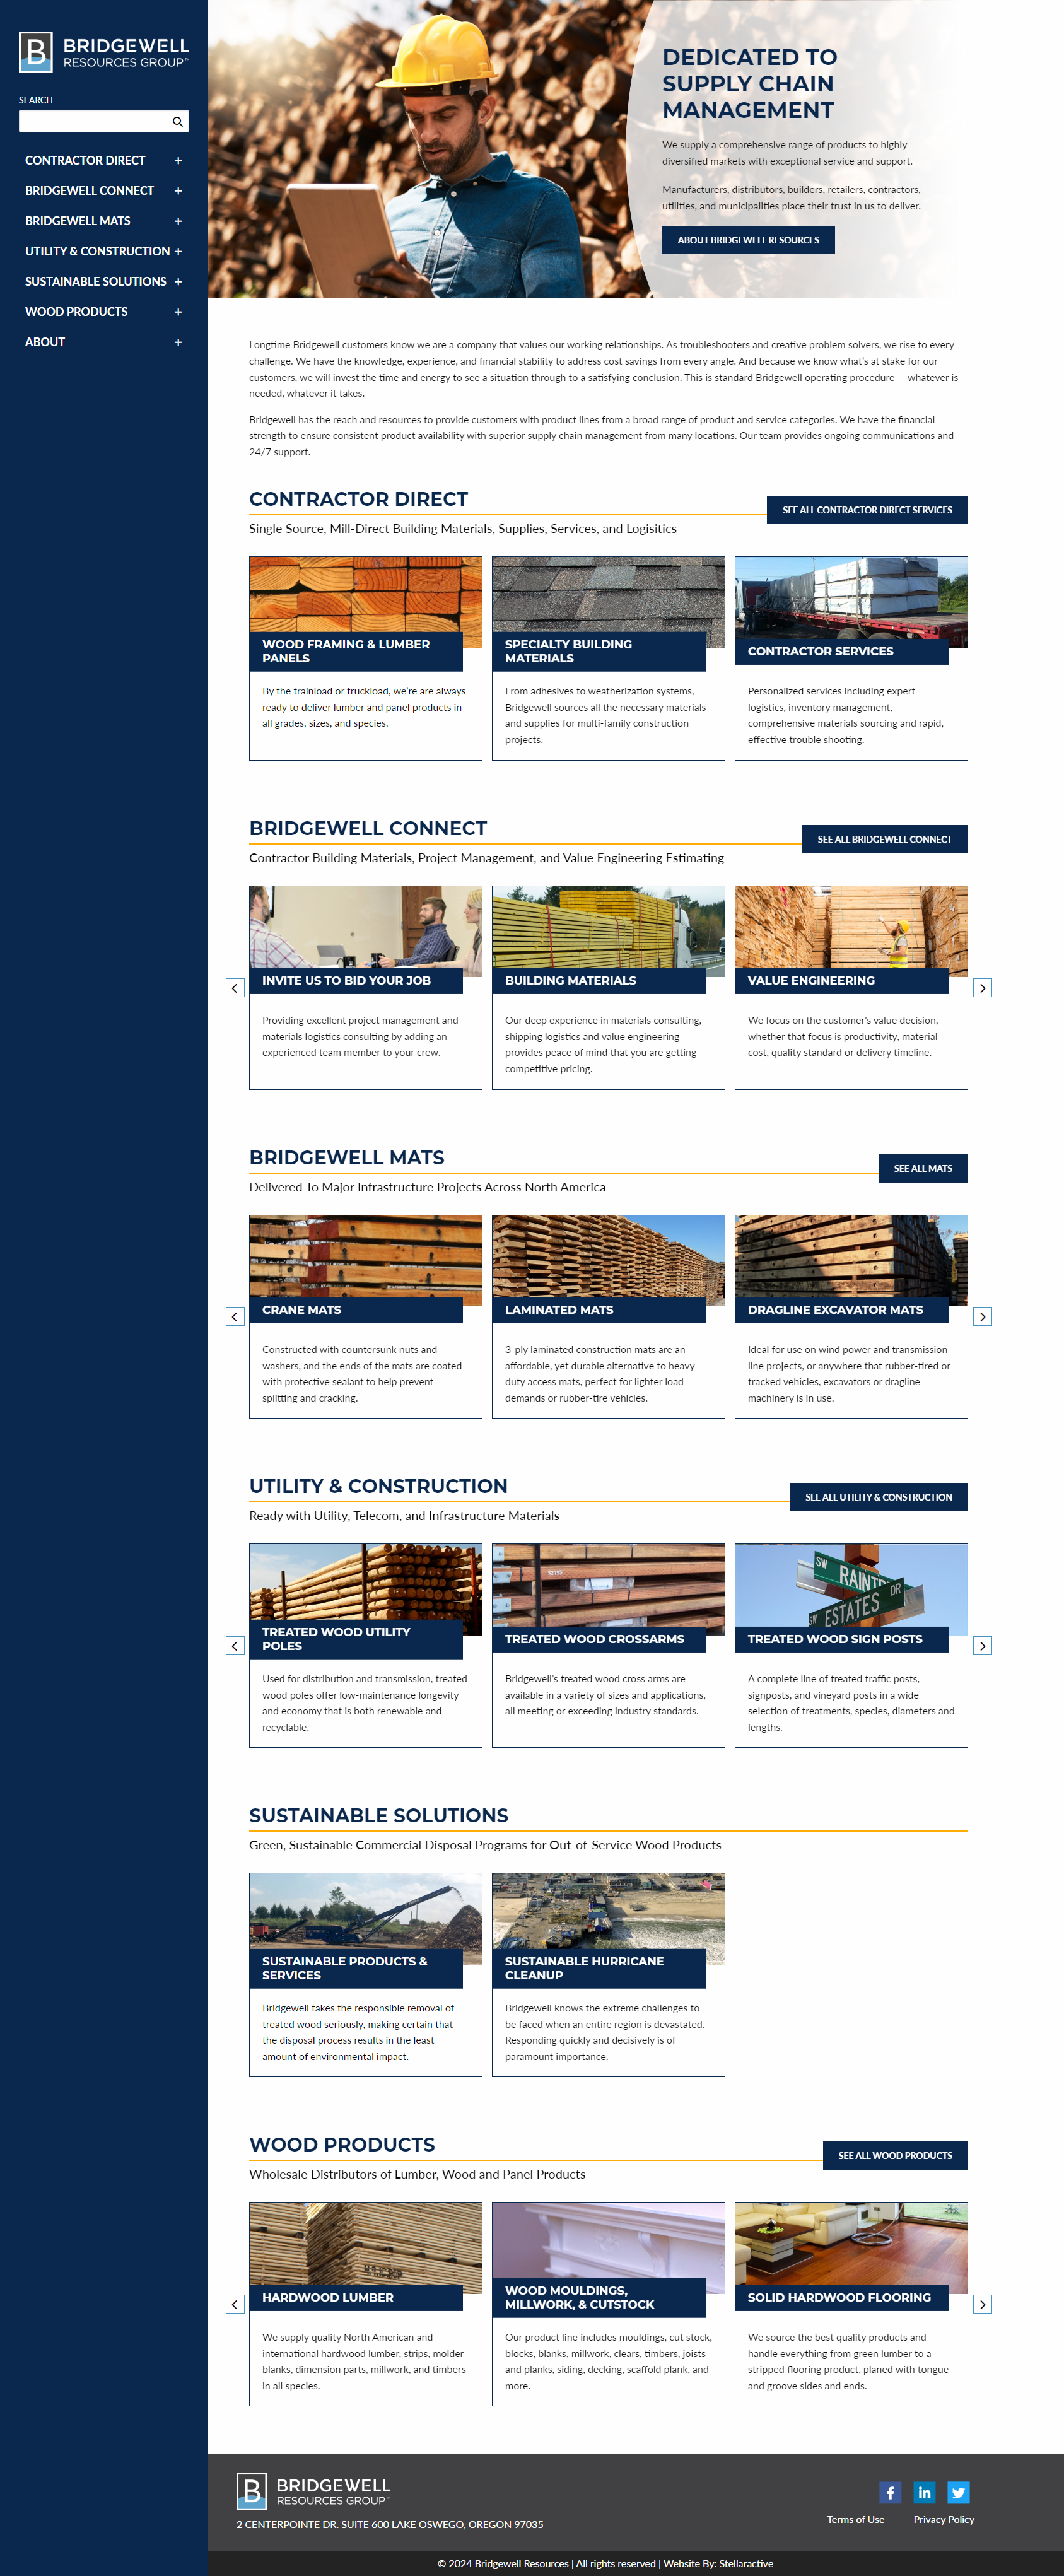 Image for Bridgewell Resources